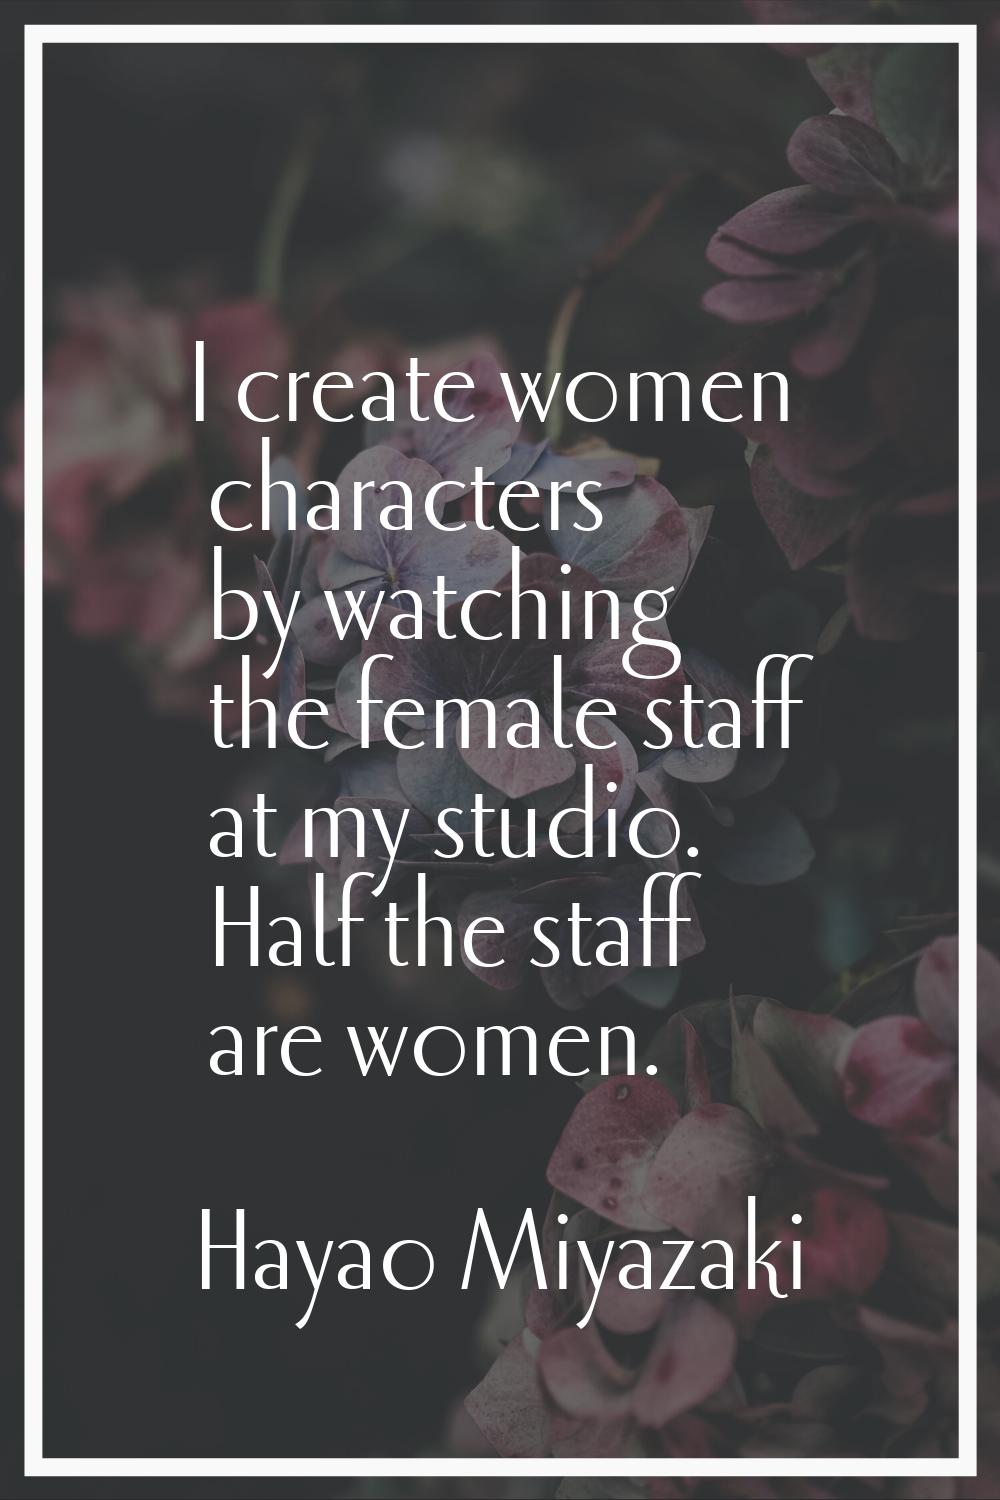 I create women characters by watching the female staff at my studio. Half the staff are women.